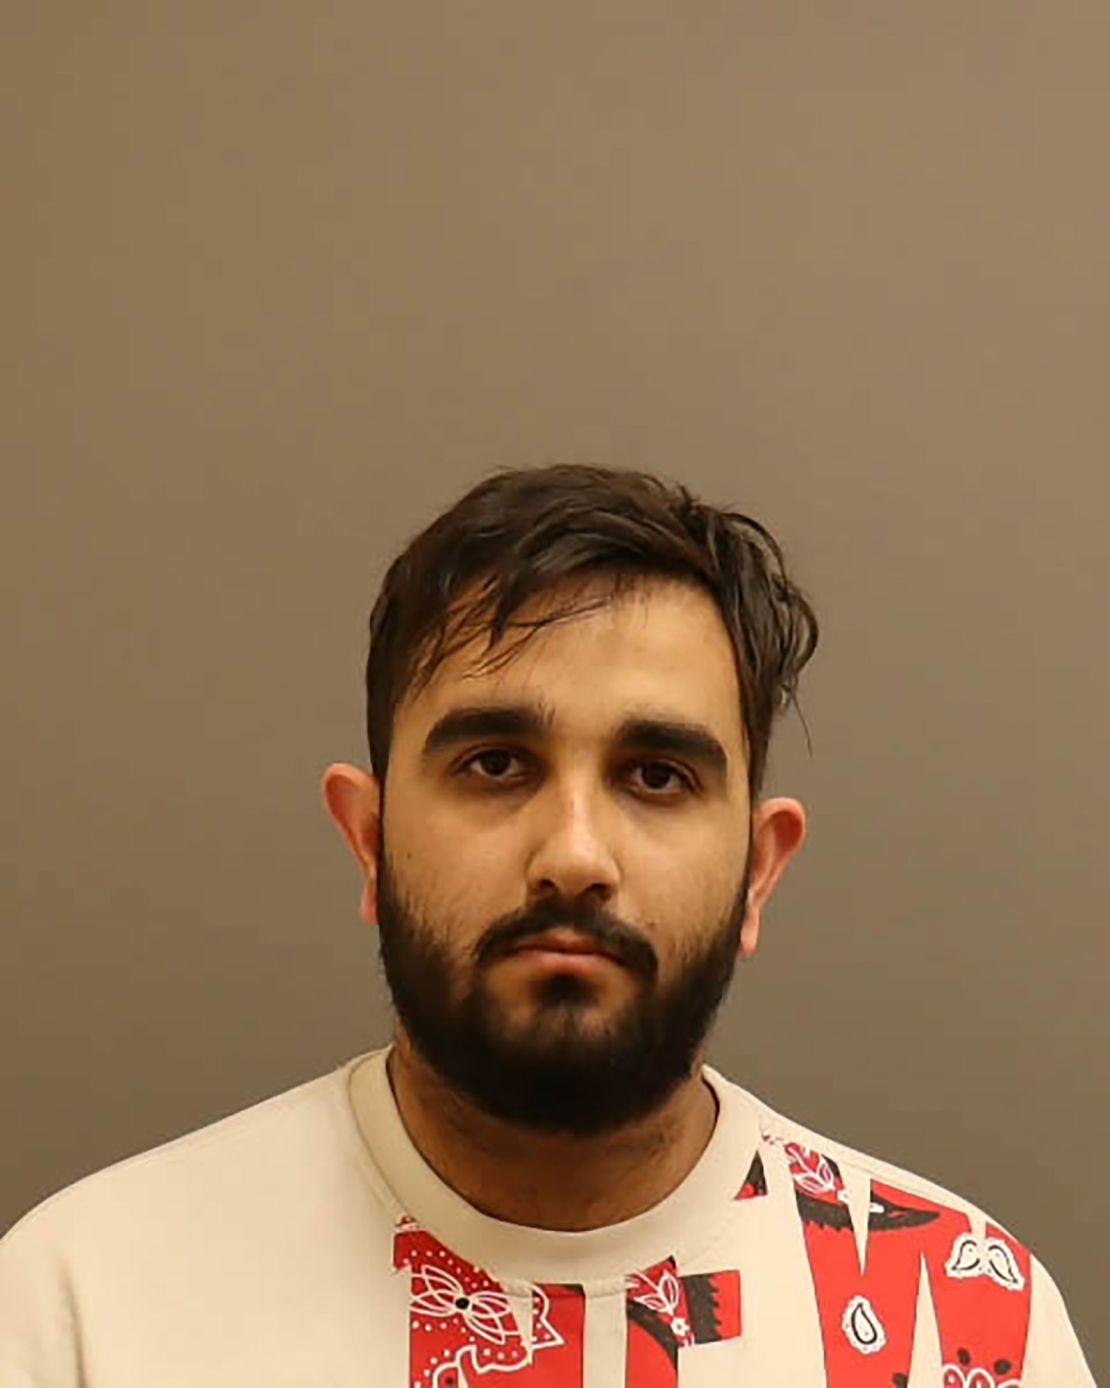 Karan Brar was charged with first-degree murder and conspiracy to commit murder.